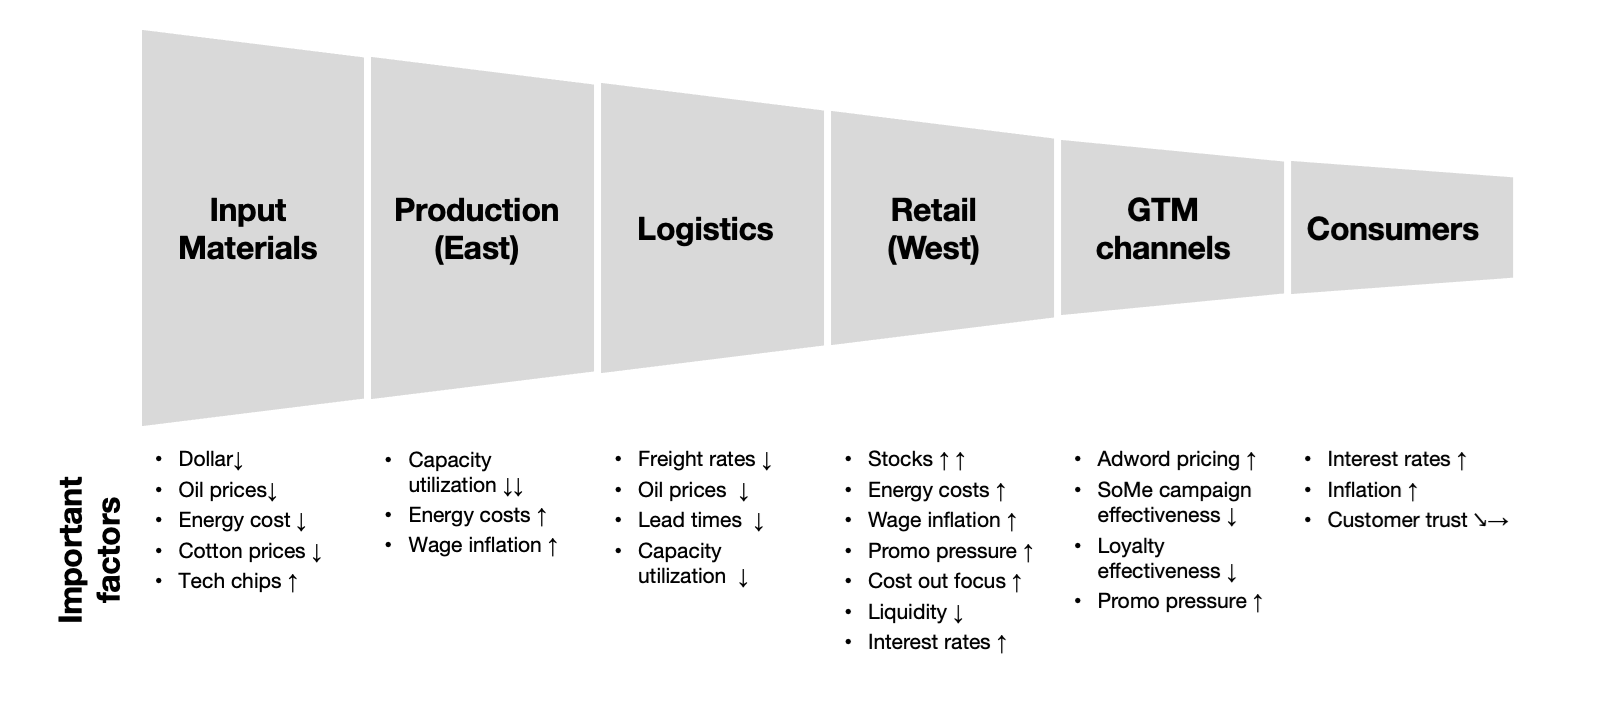 A chart showing the manner in which certain important factors increase or decrease at specific points in the value chain.